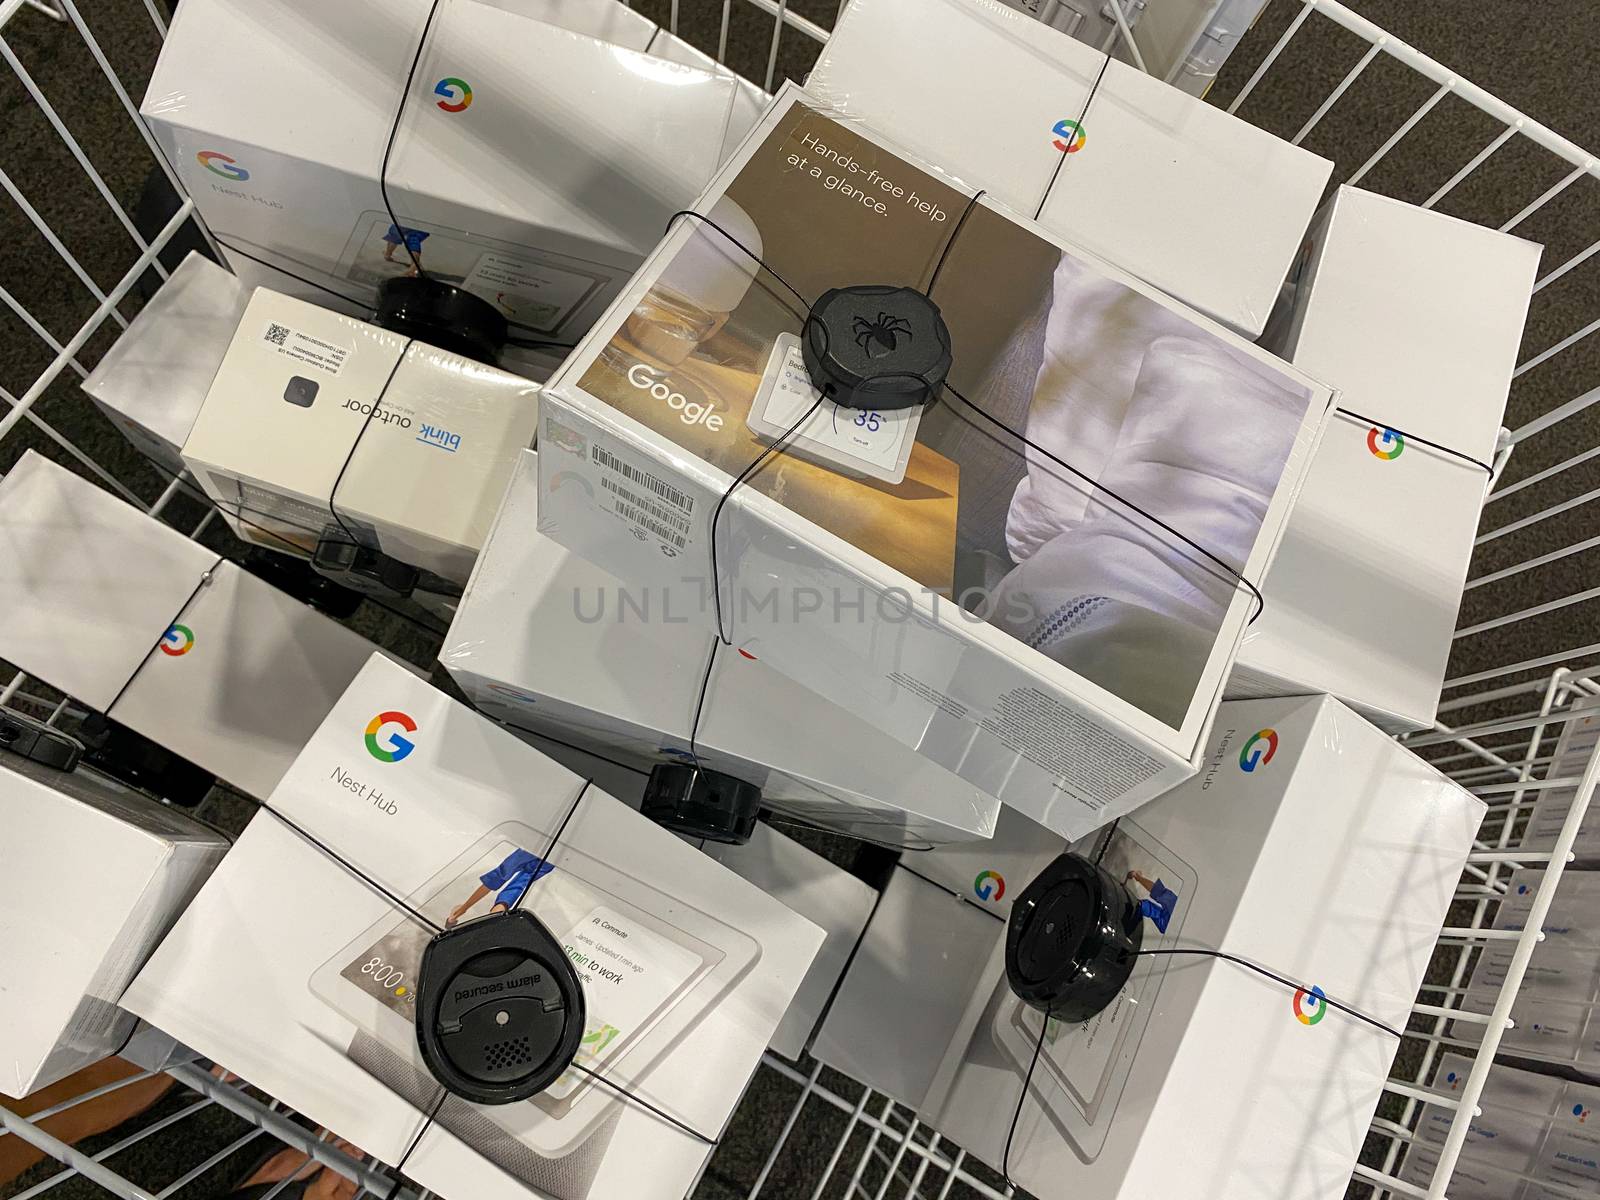 A bin of Google Nest Hub Home devices display at Best Buy in Orl by Jshanebutt